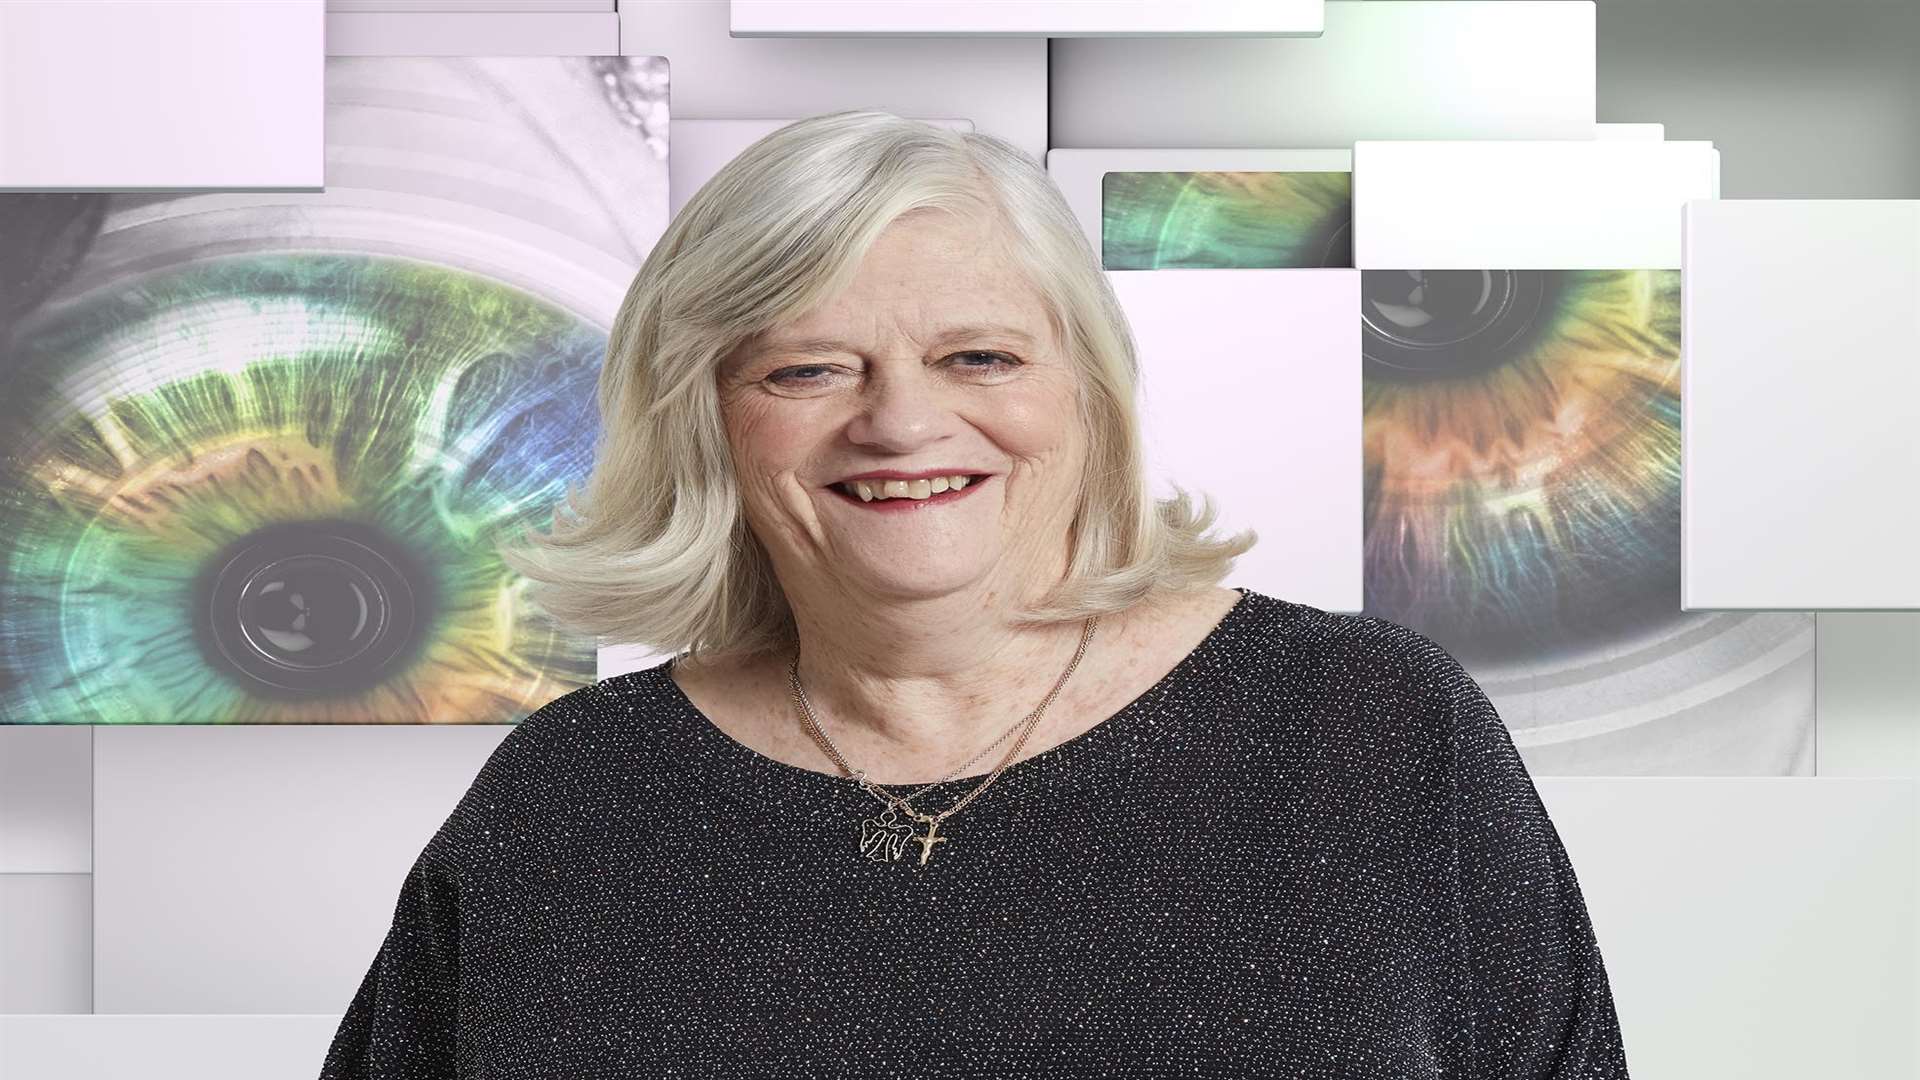 Ann Widdecombe finished second in Celebrity Big Brother